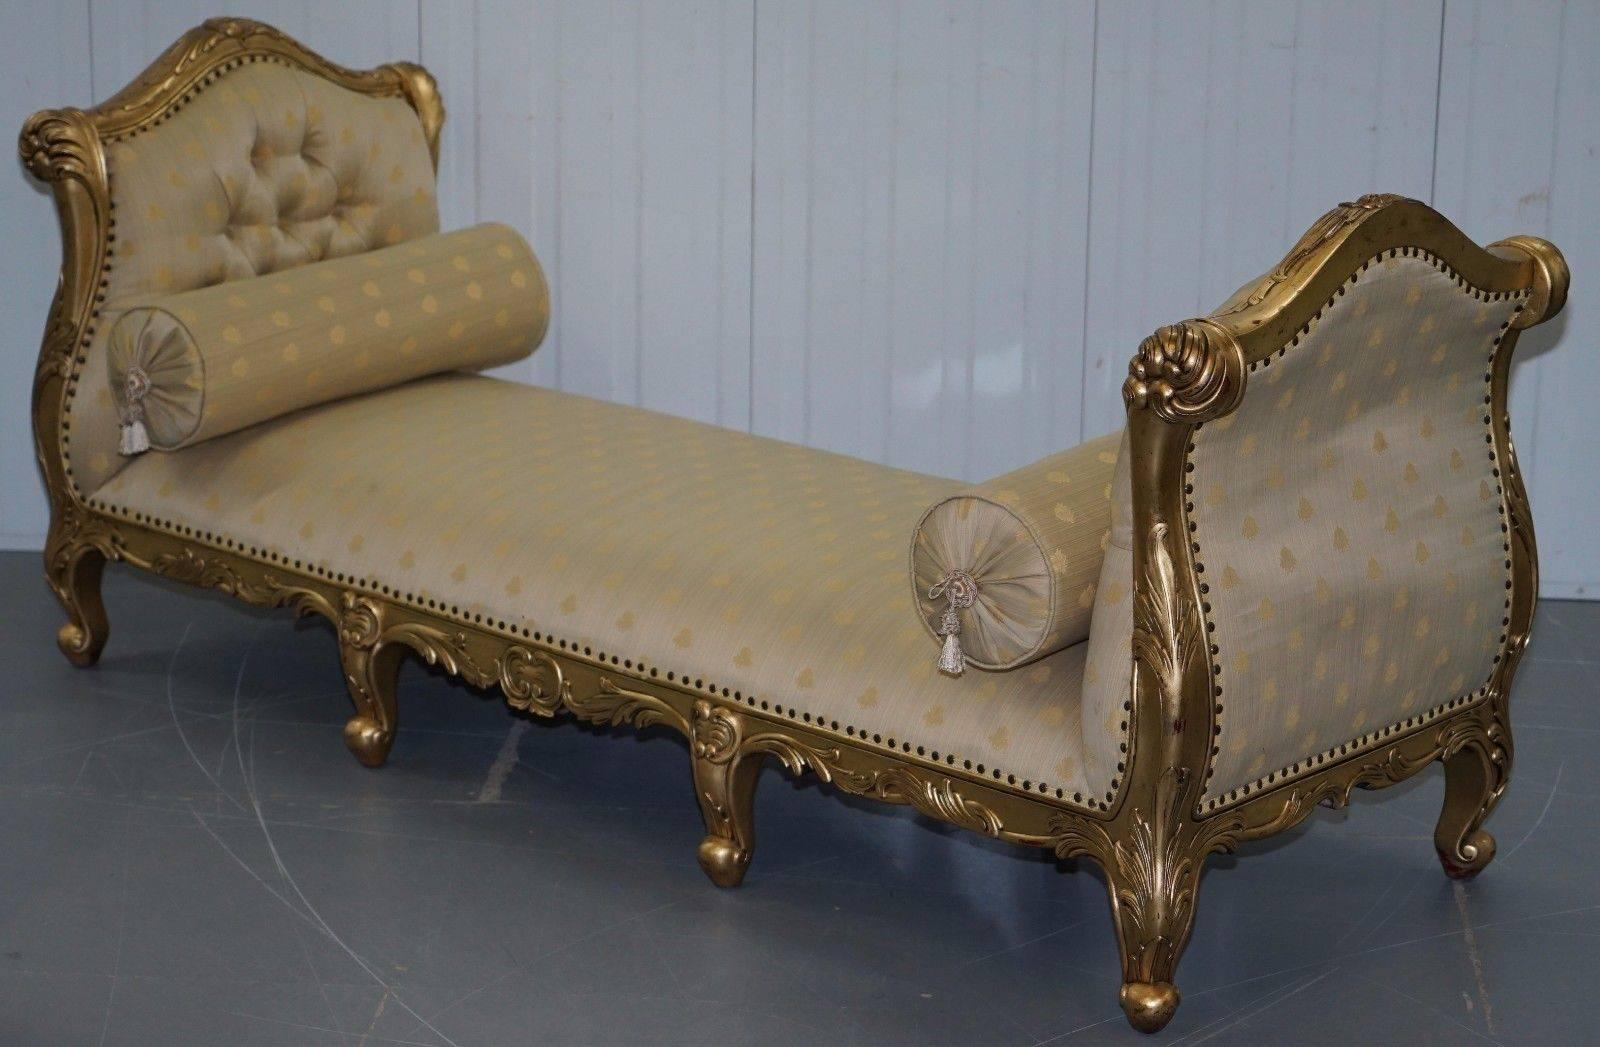 19th Century Large 3-4 Seat Victorian Gold Leaf Painted French Daybed or Chaise Longue